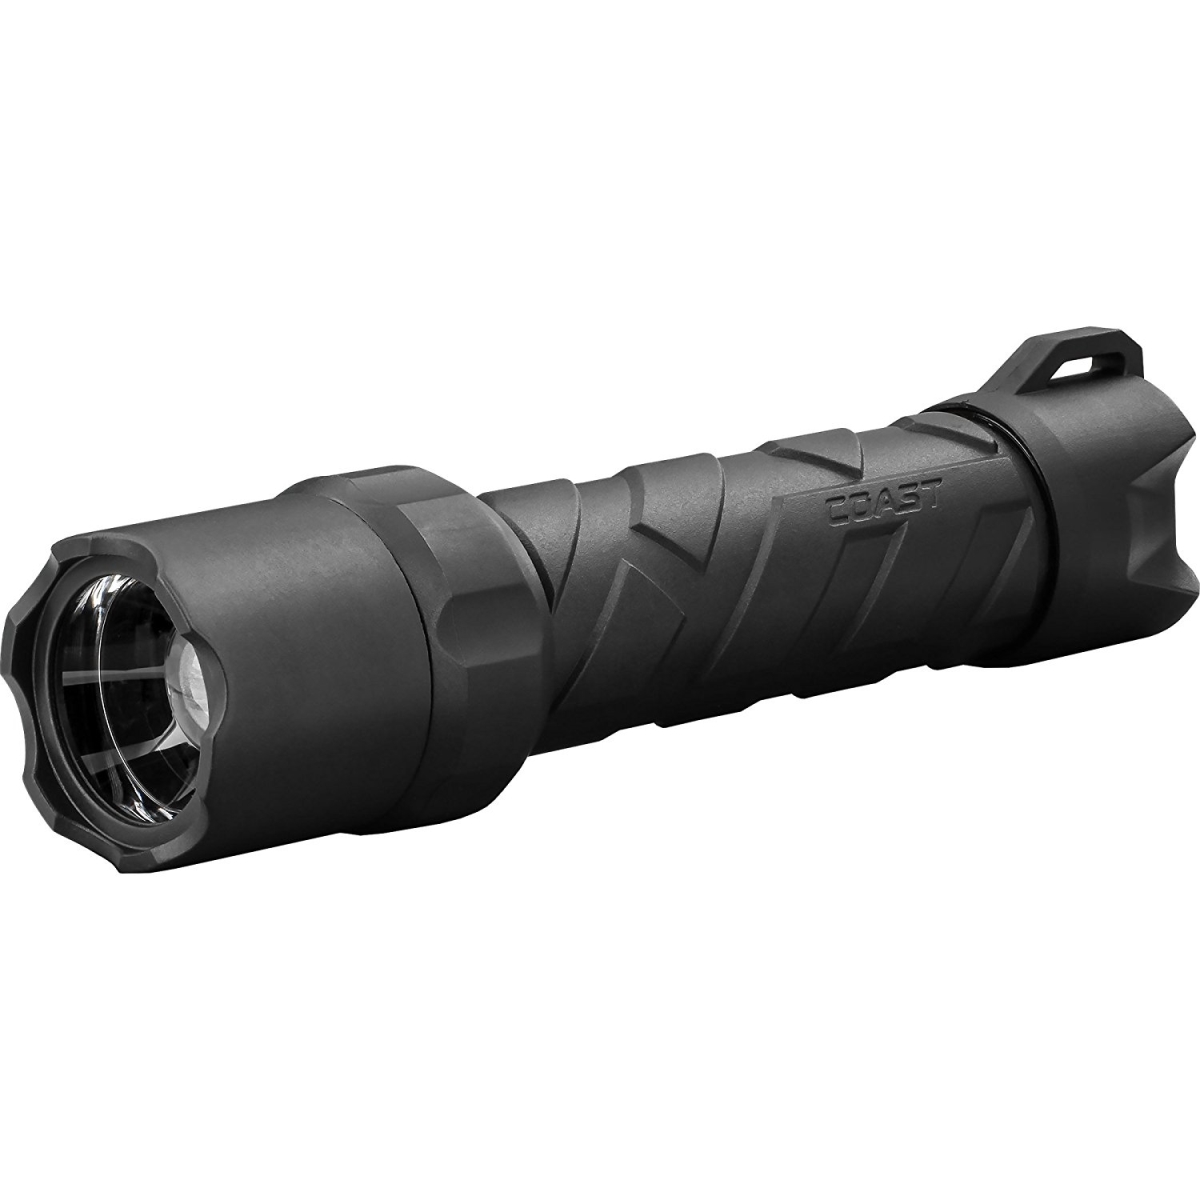 Cst-20518 Polyester 600r 530 Lm Rechargeable Waterproof Led Flashlight, Black